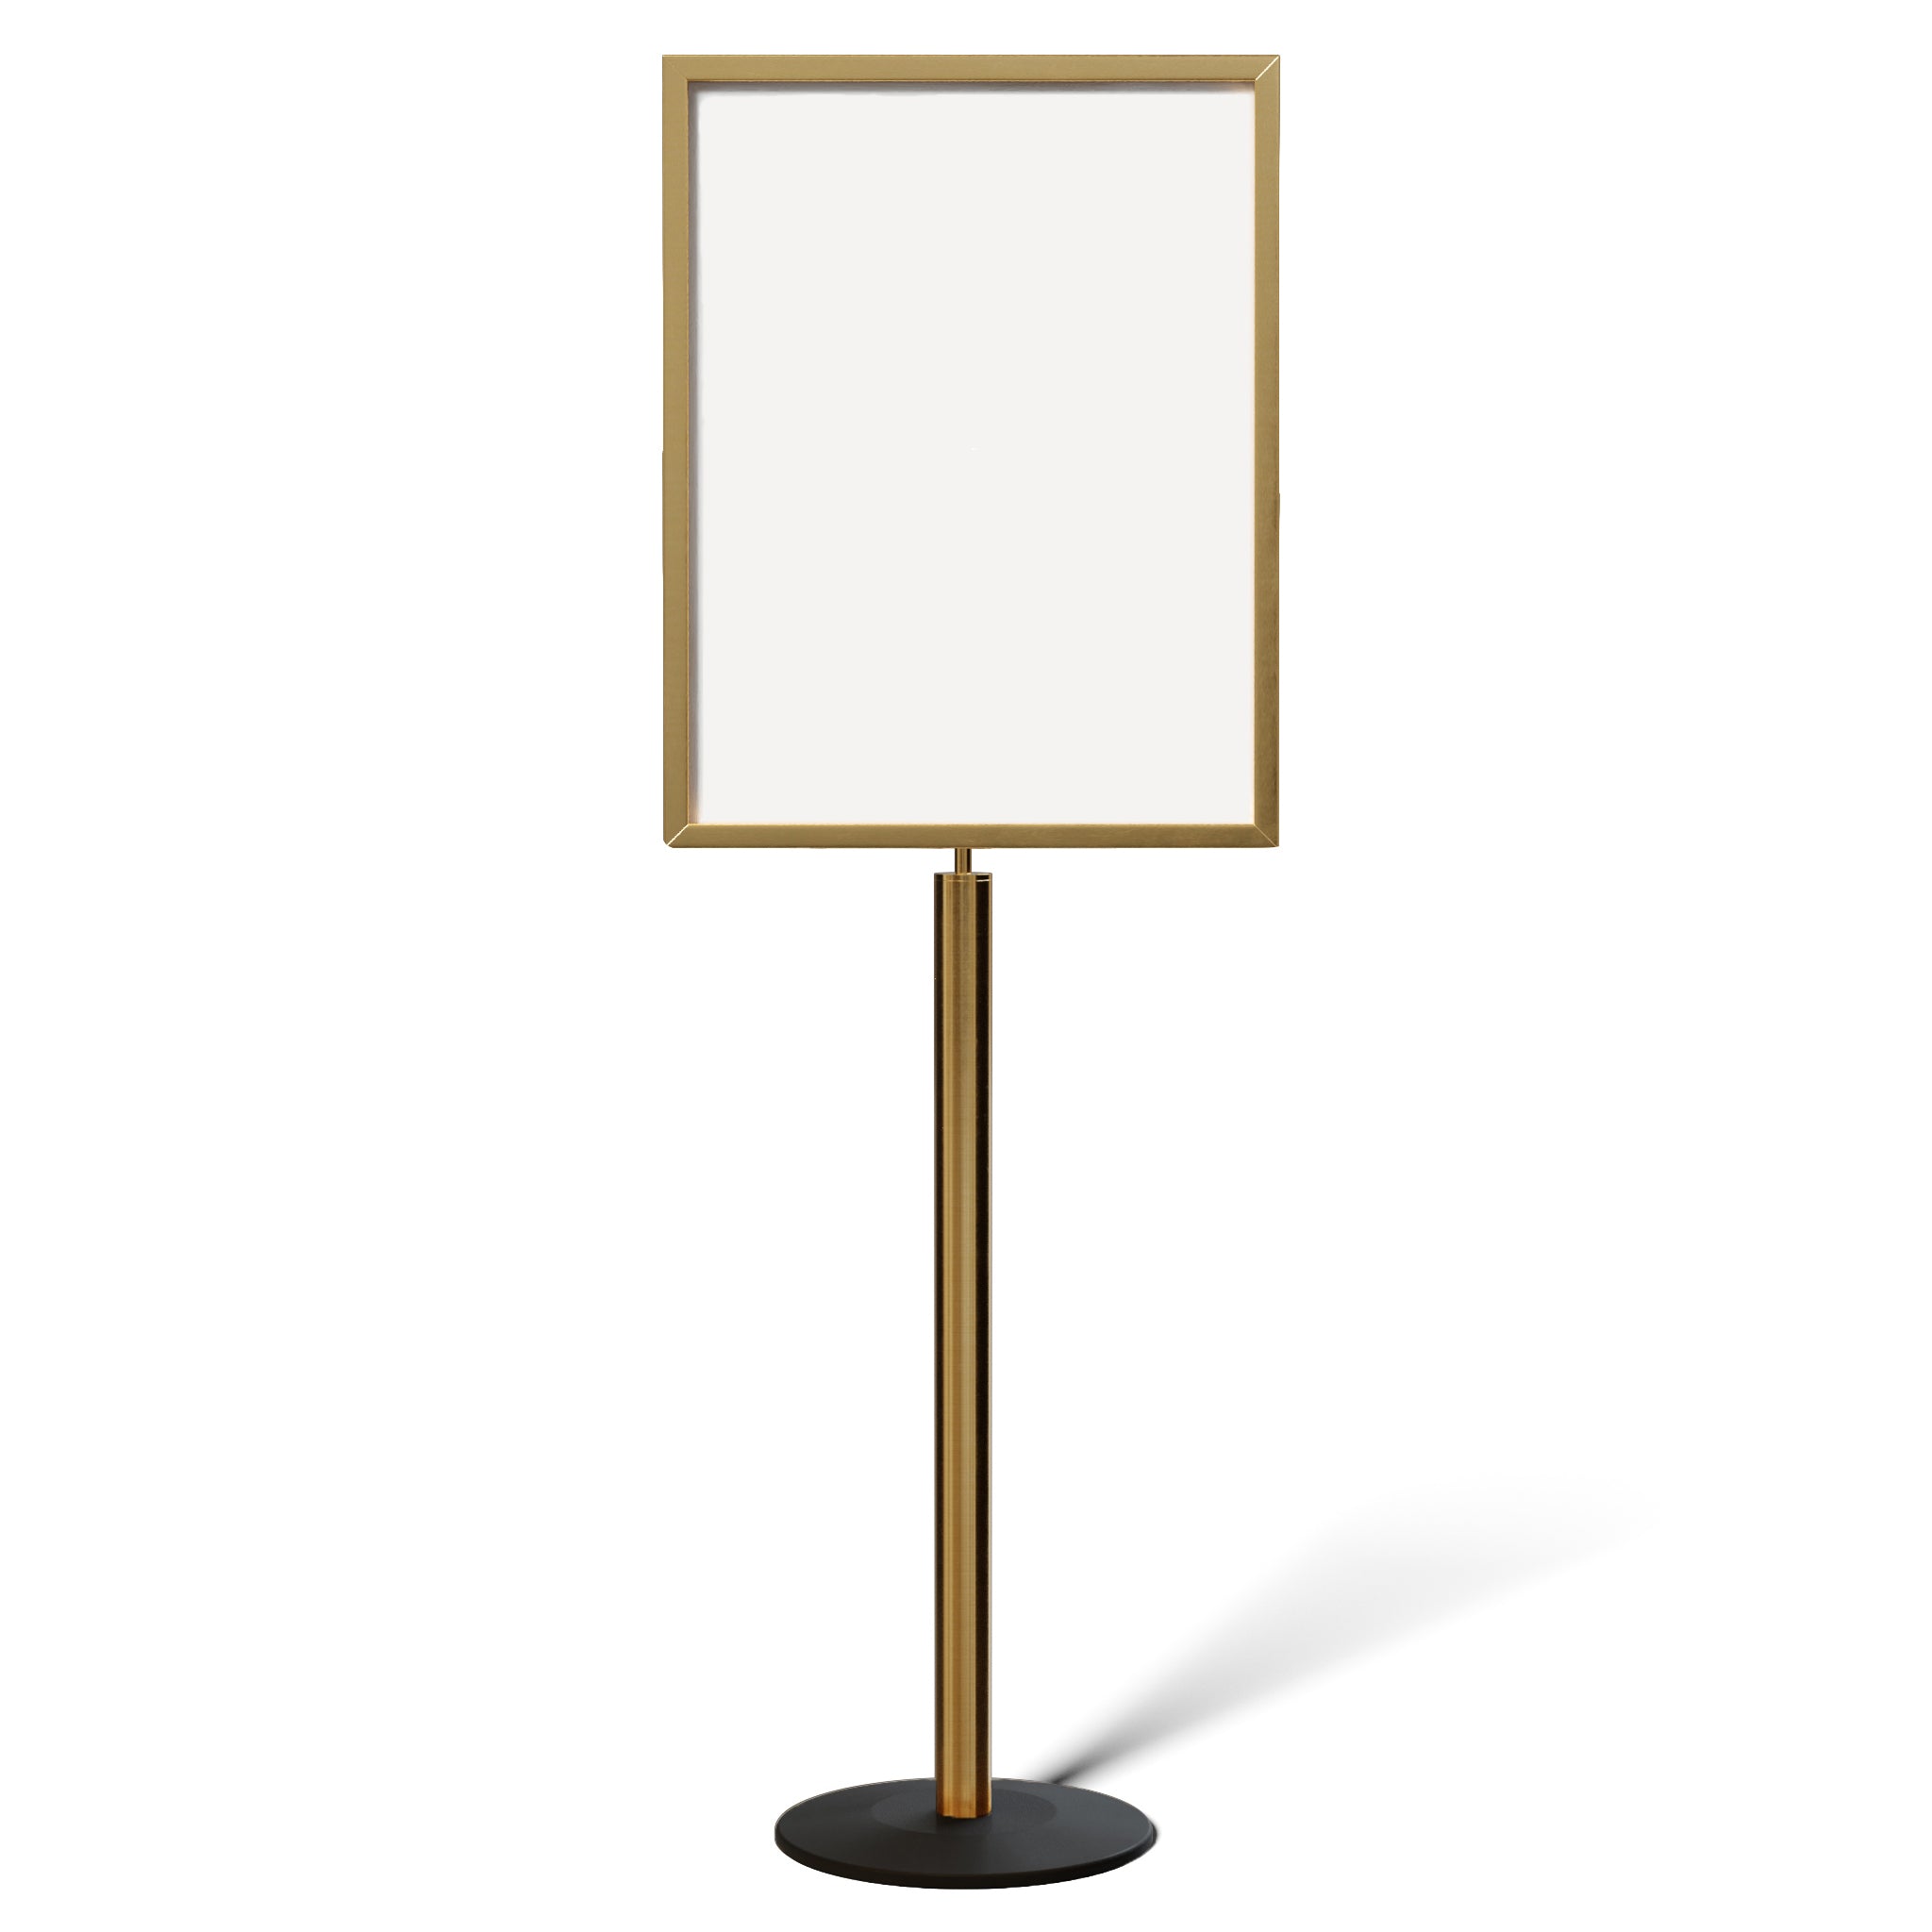 VKF Renzel USA Corp. Unico Base Sign Stand,Freestanding Aluminum Sign  Holder, 4 Clamping Width, Holds Oversized Signs Up To 1.125 Inches Thick.  Great For Trade Shows, Stores